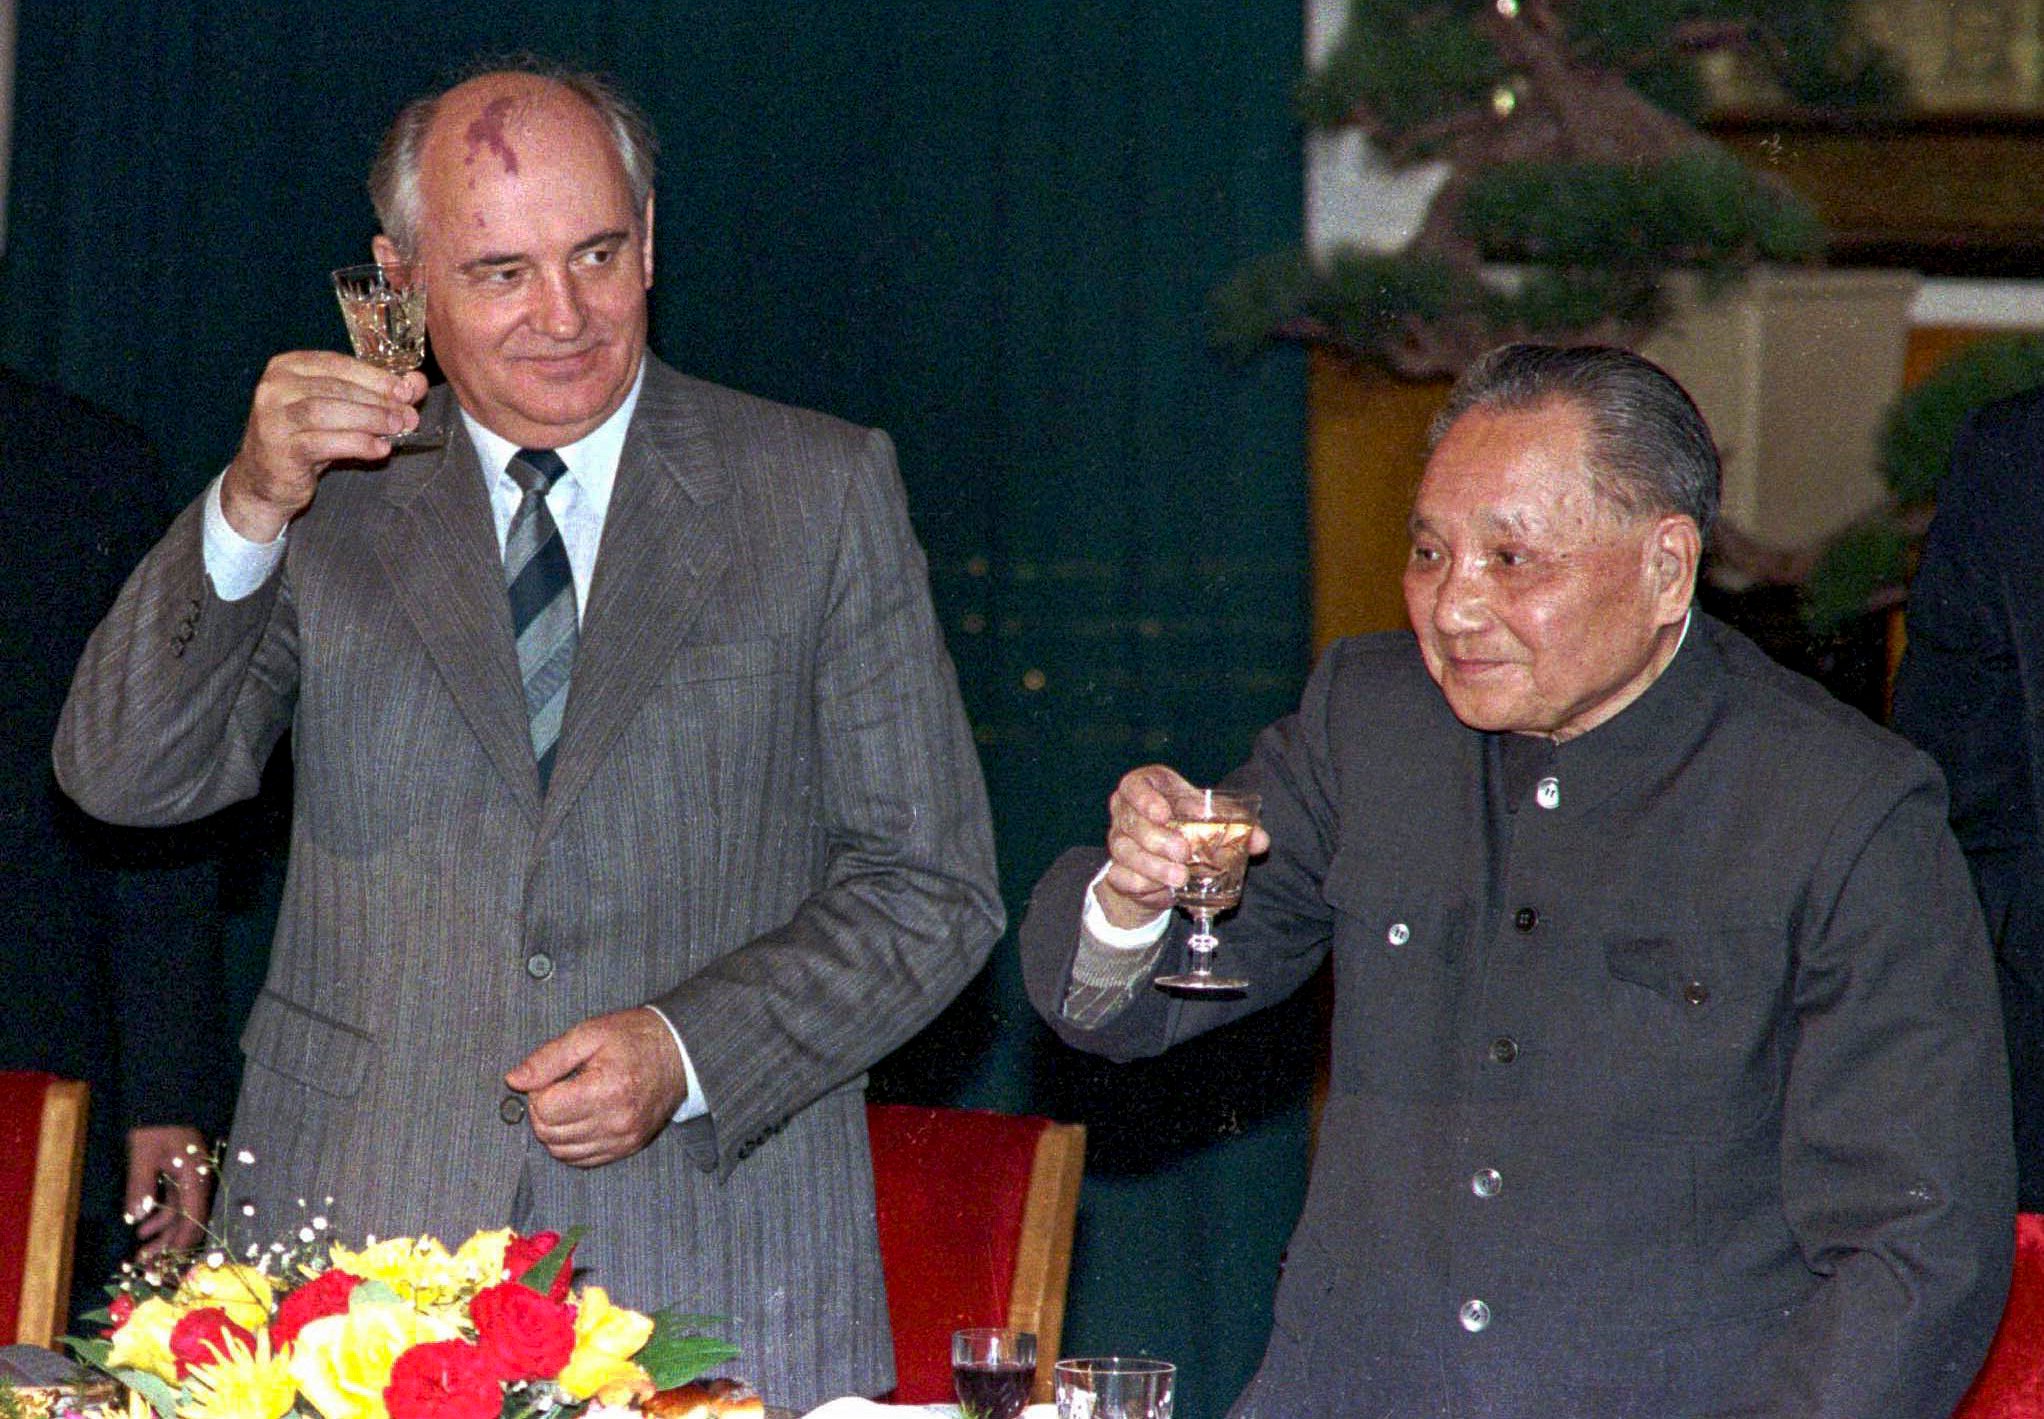 Soviet leader Mikhail Gorbachev (left) raises his glass in a toast with Chinese senior leader Deng Xiaoping at a banquet at the Great Hall of the People on May 16, 1989. Photo: Reuters